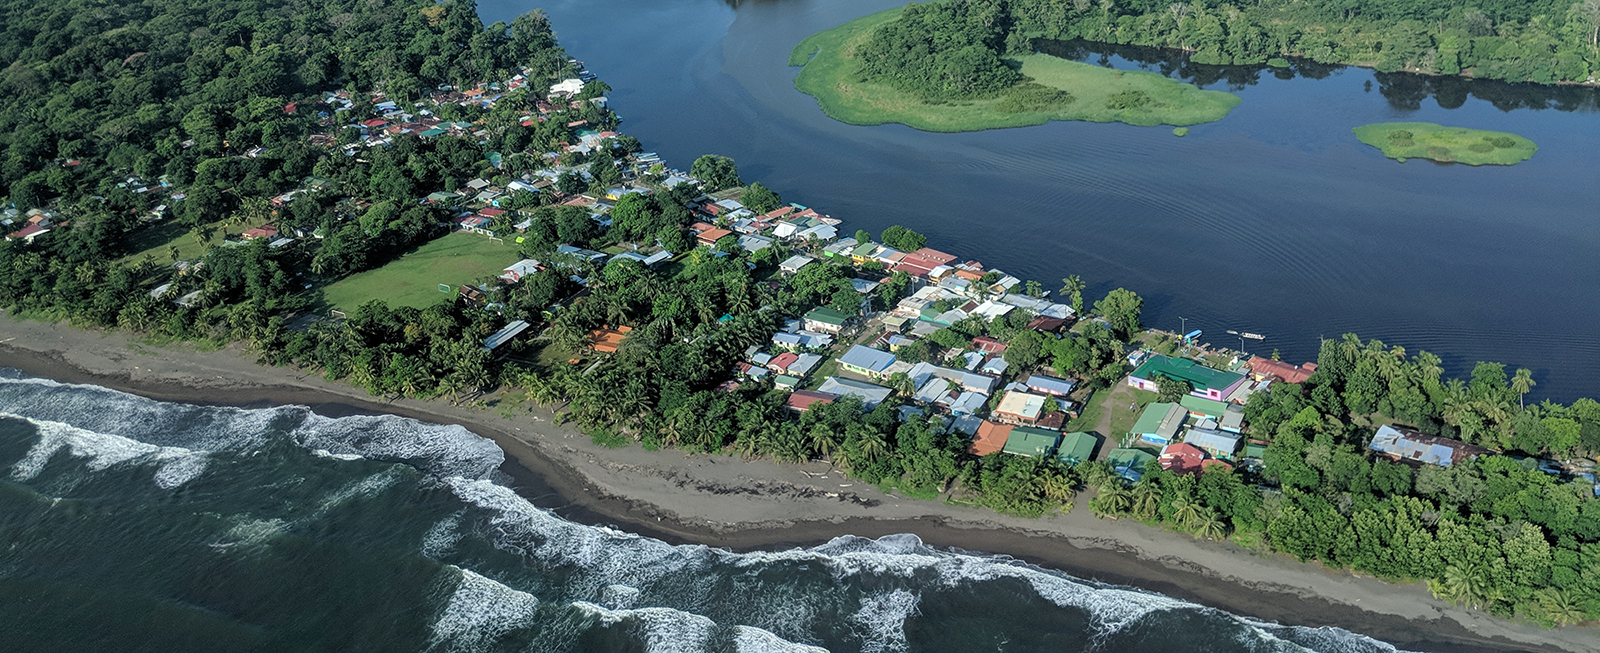 Tortuguero National Park to/from Puerto Viejo – River Boat  Shuttle to the “Costa Rica’s Amazon”